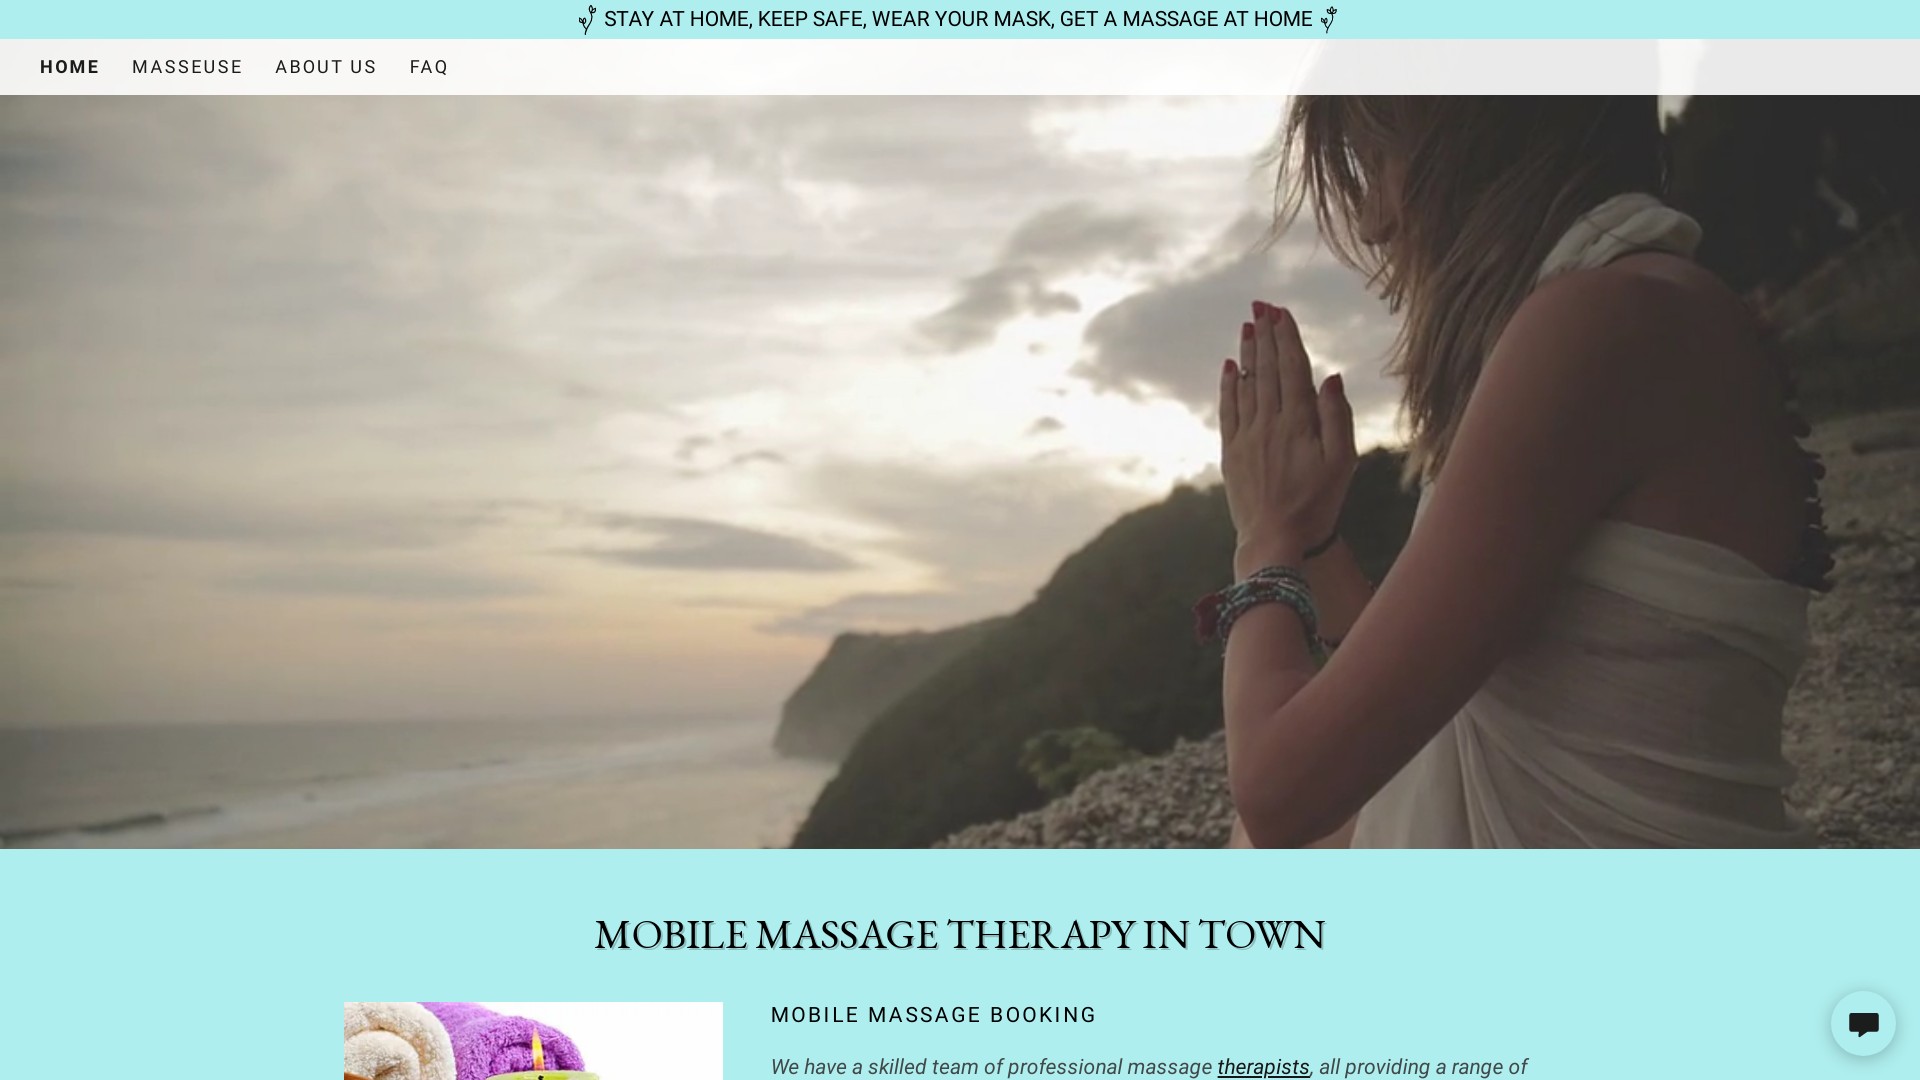 Is mmbooking a Scam? Review of the Mobile Massage Therapy Website